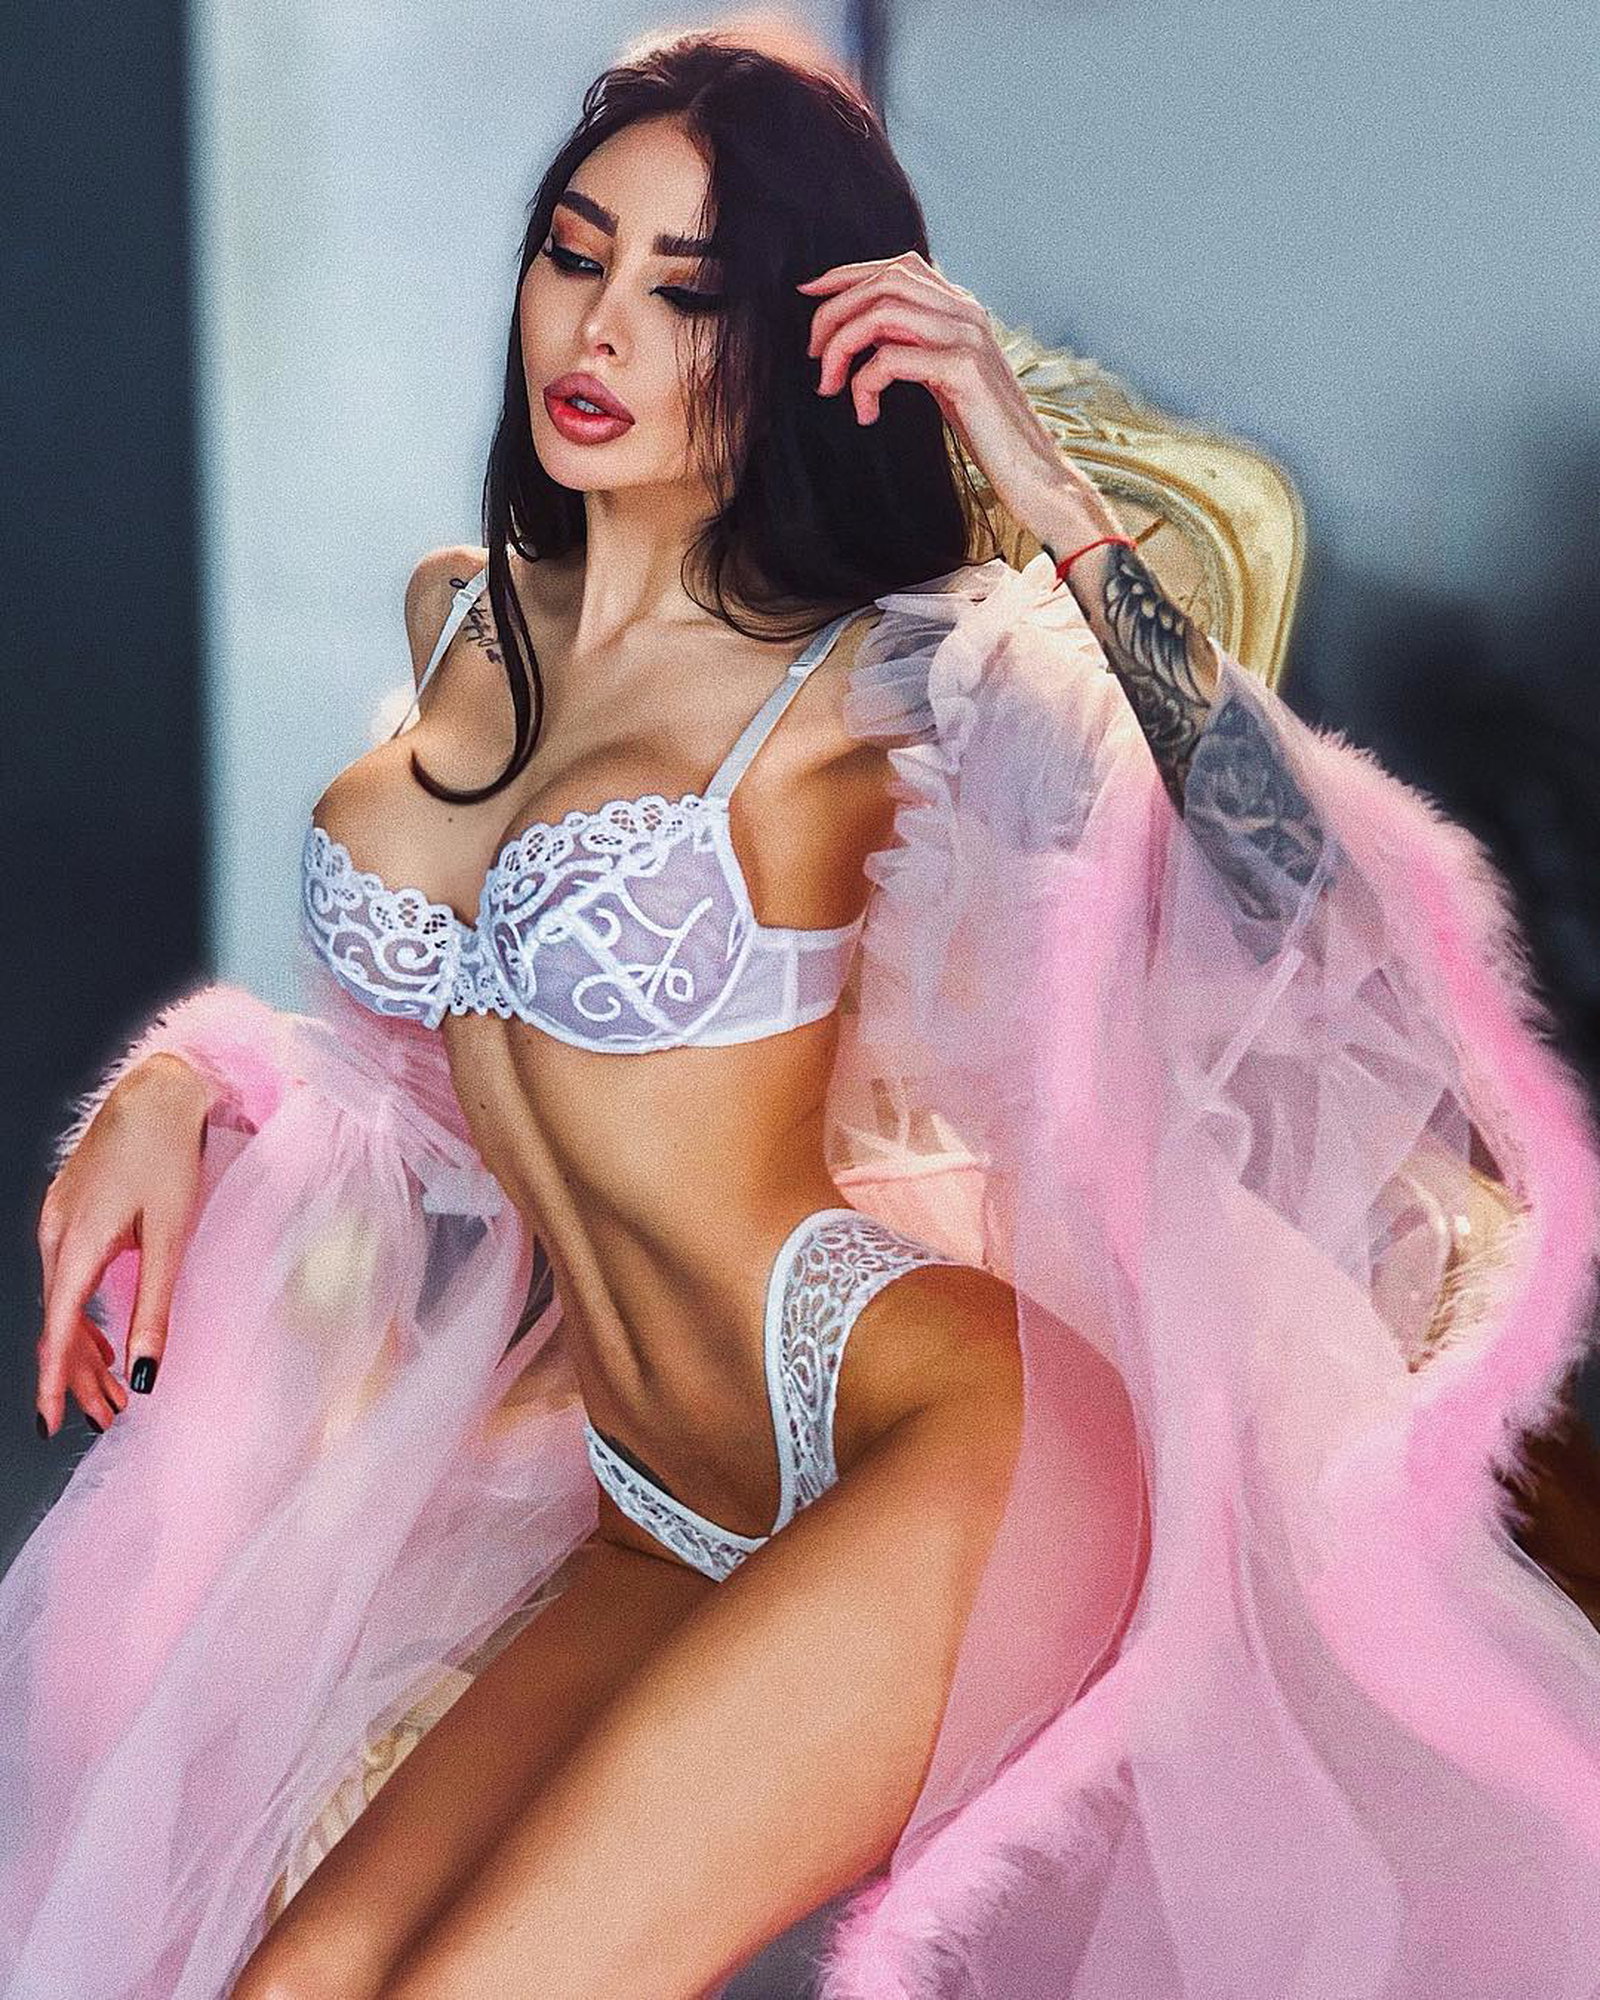 Photo by Devynsdogg with the username @Devynsdogg,  February 10, 2019 at 5:30 PM. The post is about the topic Bimbo and the text says 'I think Alena Omovych is the ultimate bimbo Queen! #russianmodels #faketits #hourglassfigures #breastimpantsplasticpositive #brunettebeauties #beautifulgirls
/?utm_source=ig_web_copy_link'